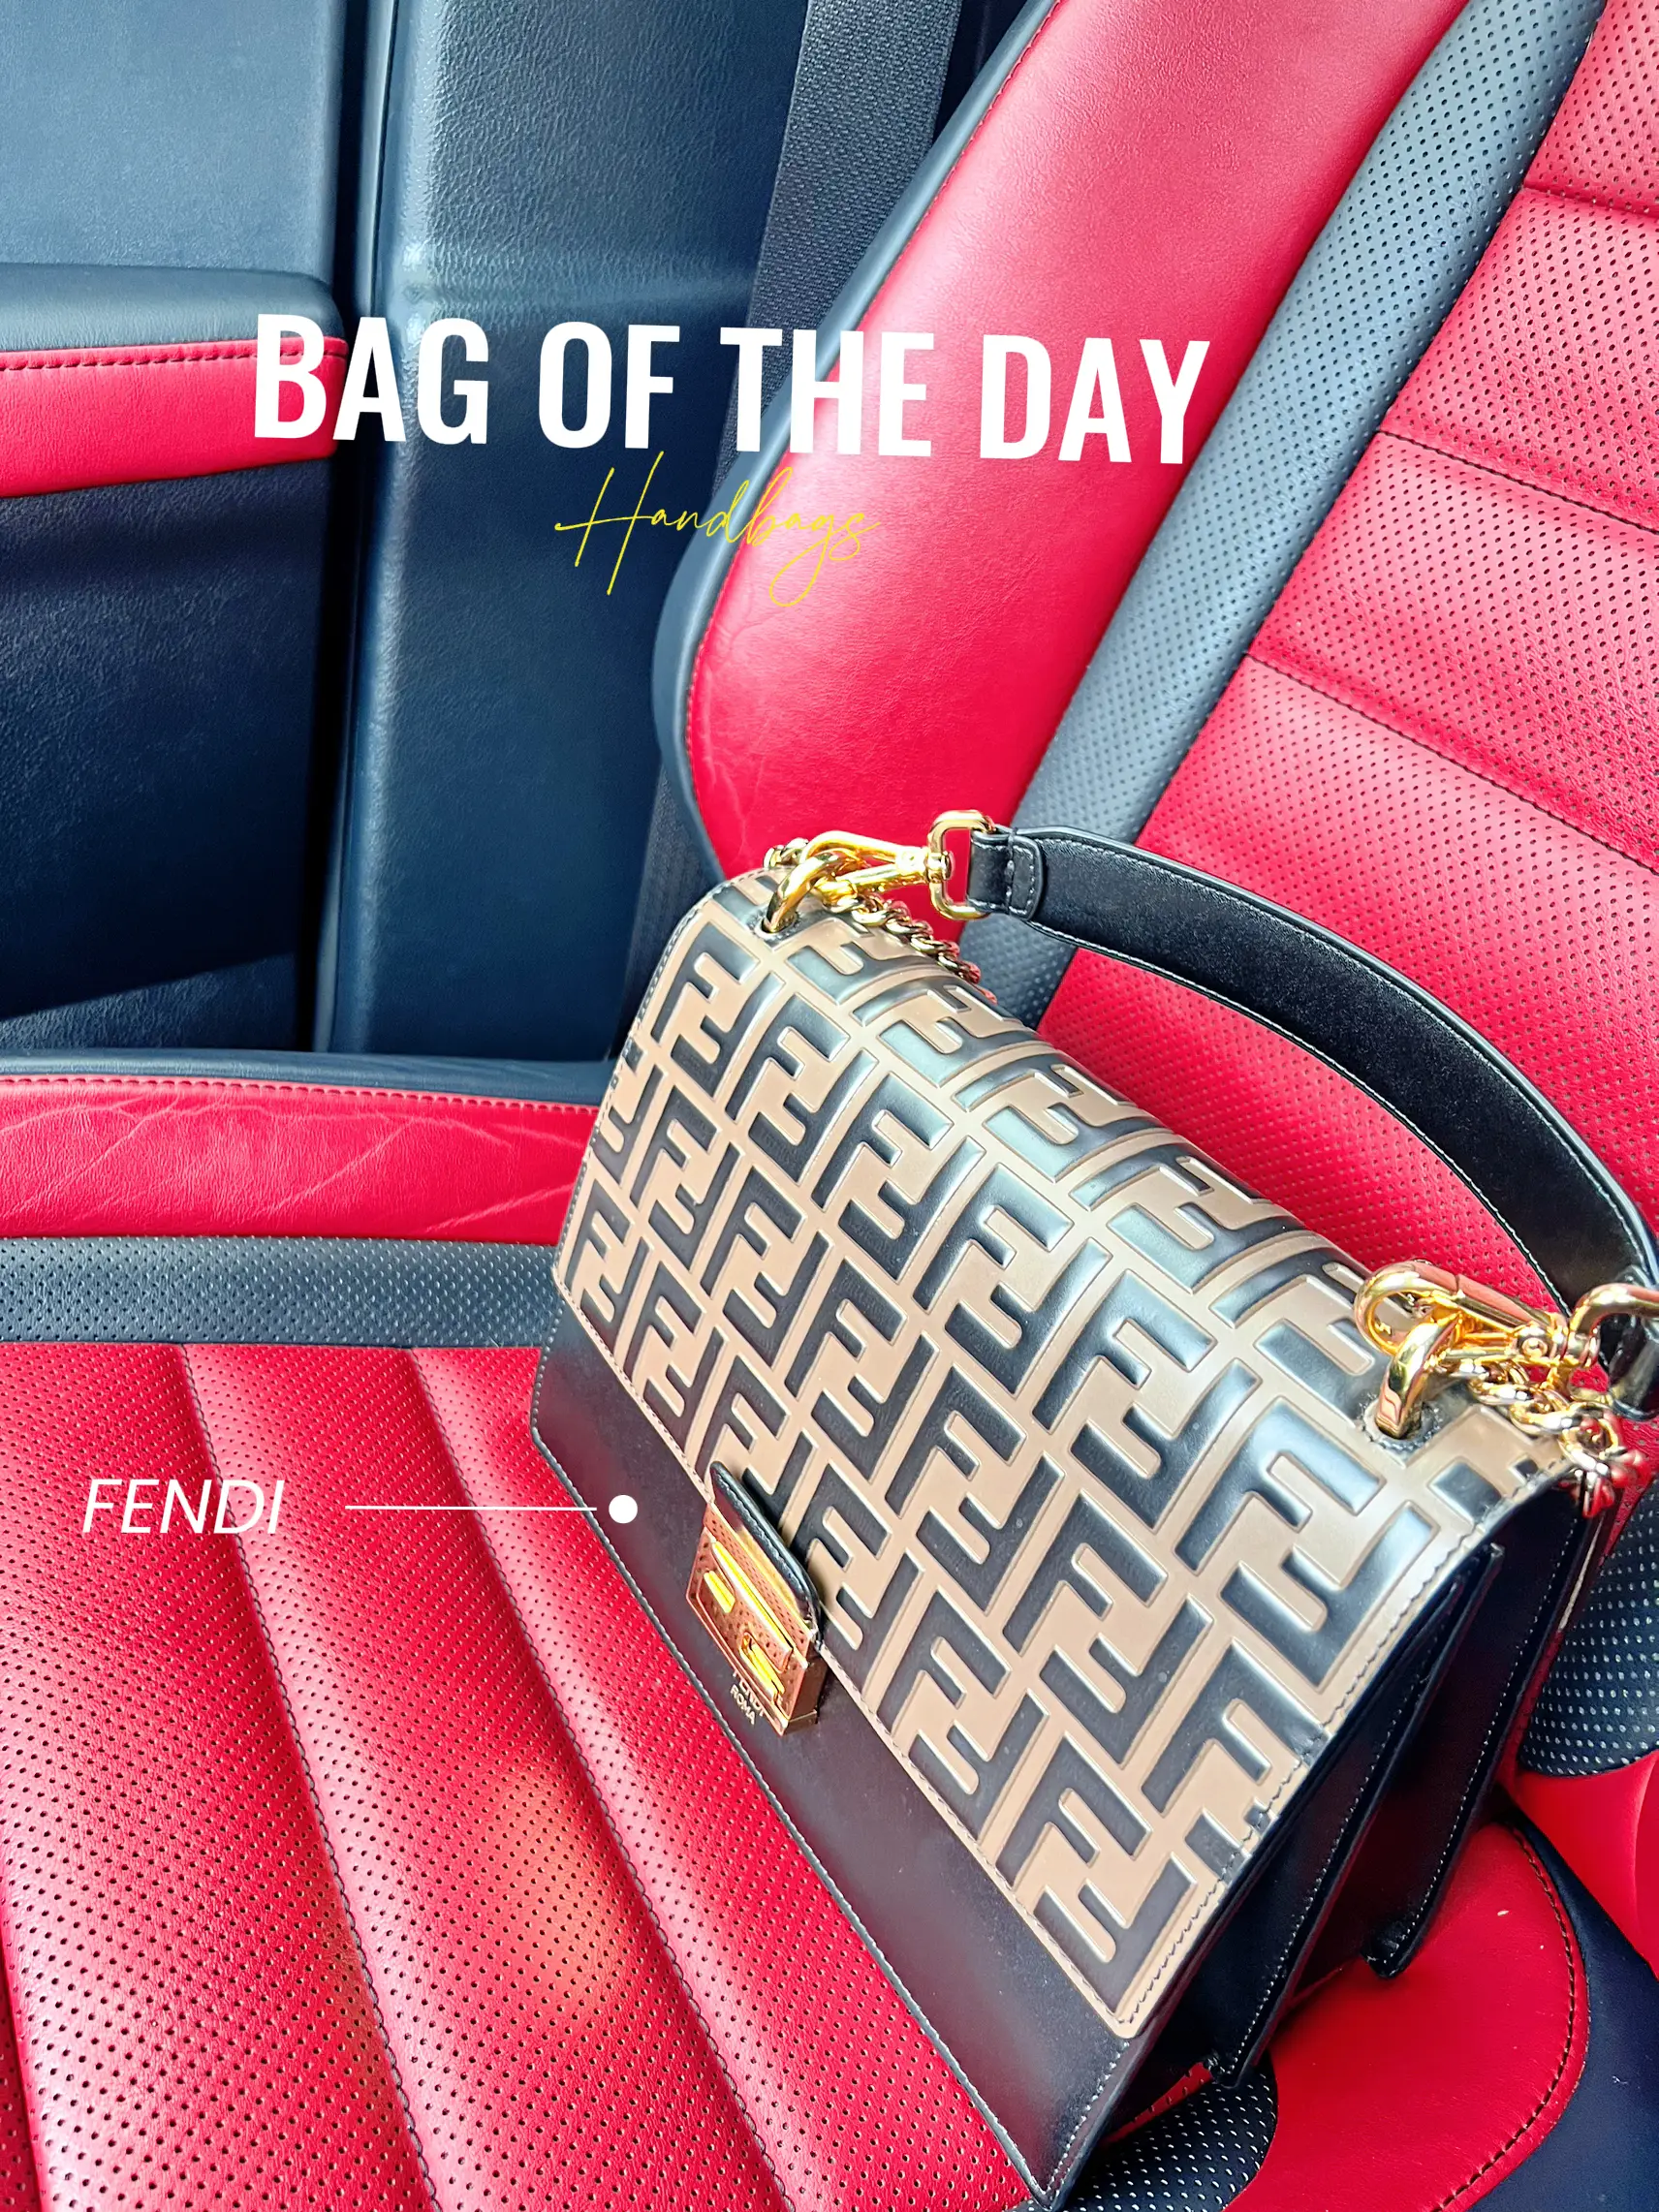 My Favorite Handbag, Gallery posted by ATWGyrl